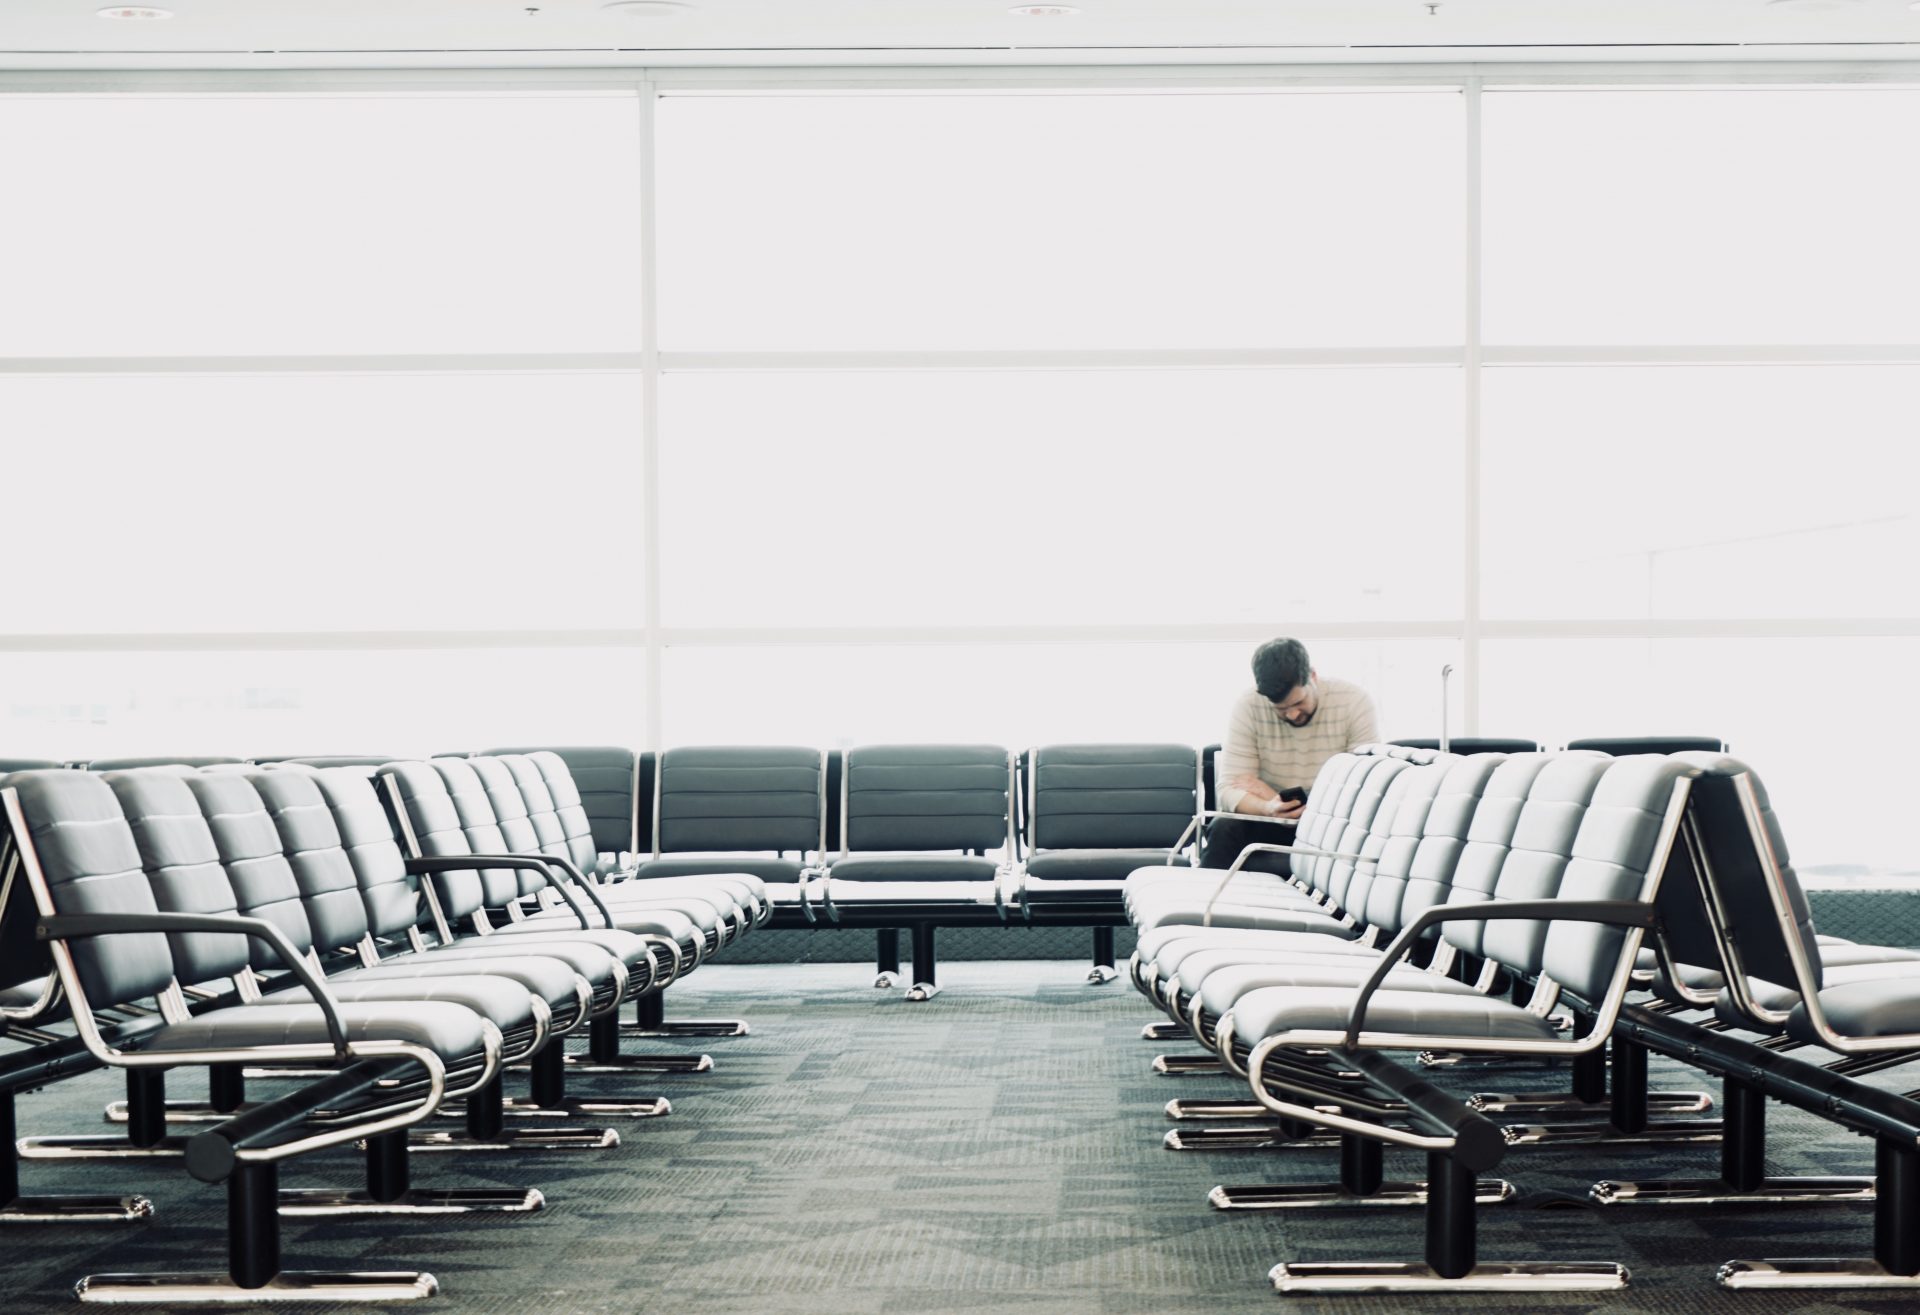 Man sitting alone at airport waiting area, checking phone for flight info